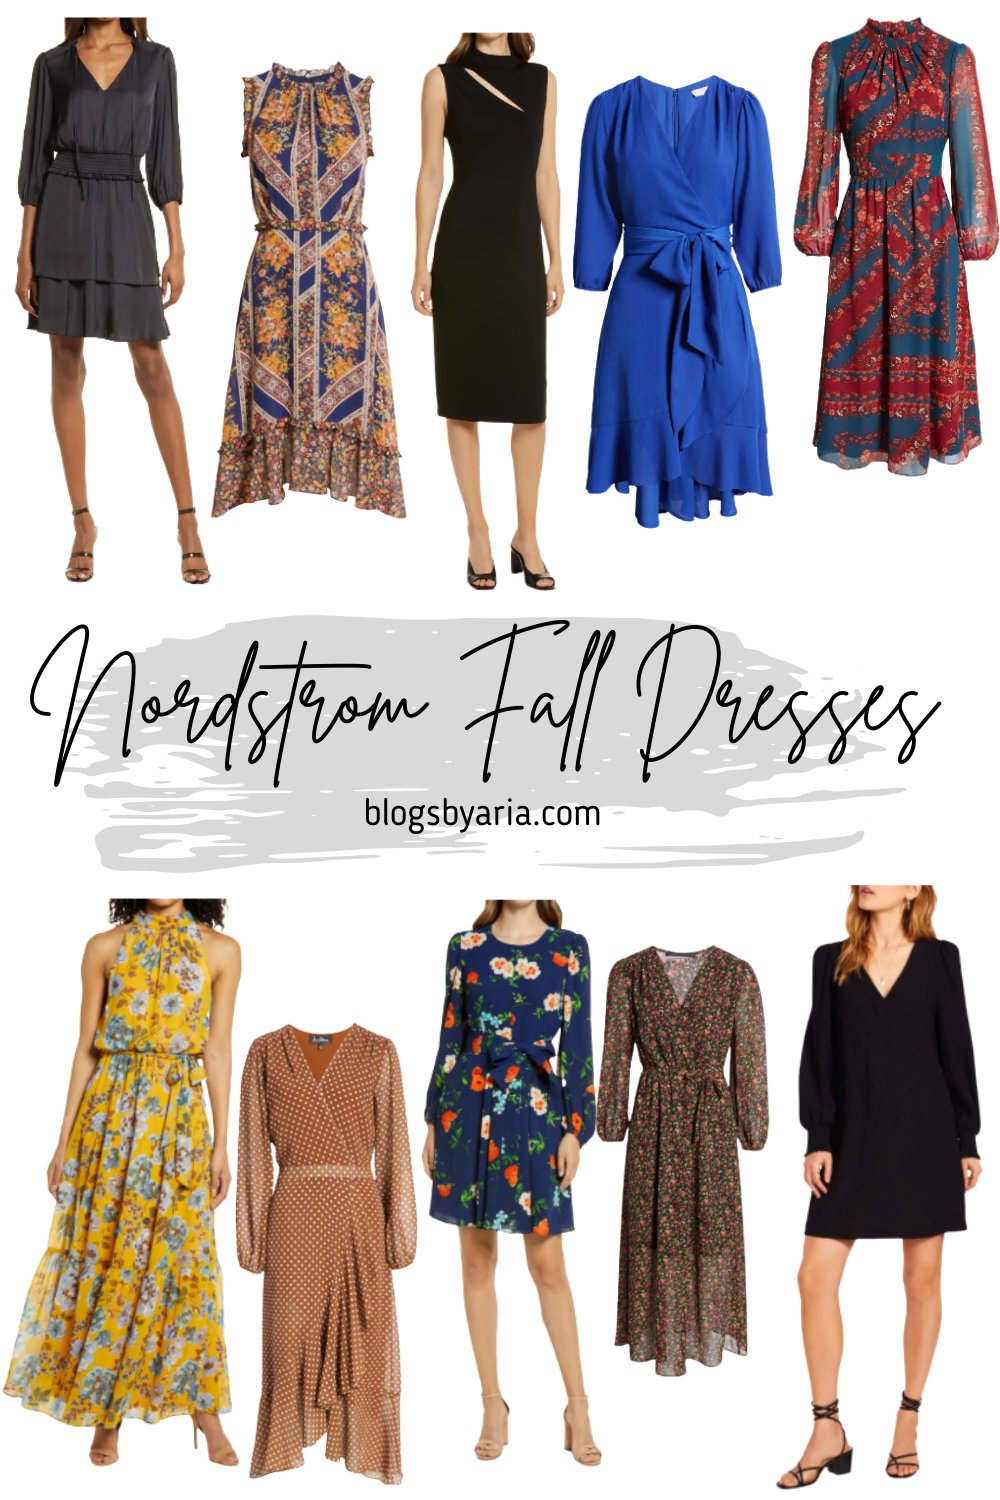 Nordstrom Anniversary Sale Outfits Part 2 - Blogs by Aria